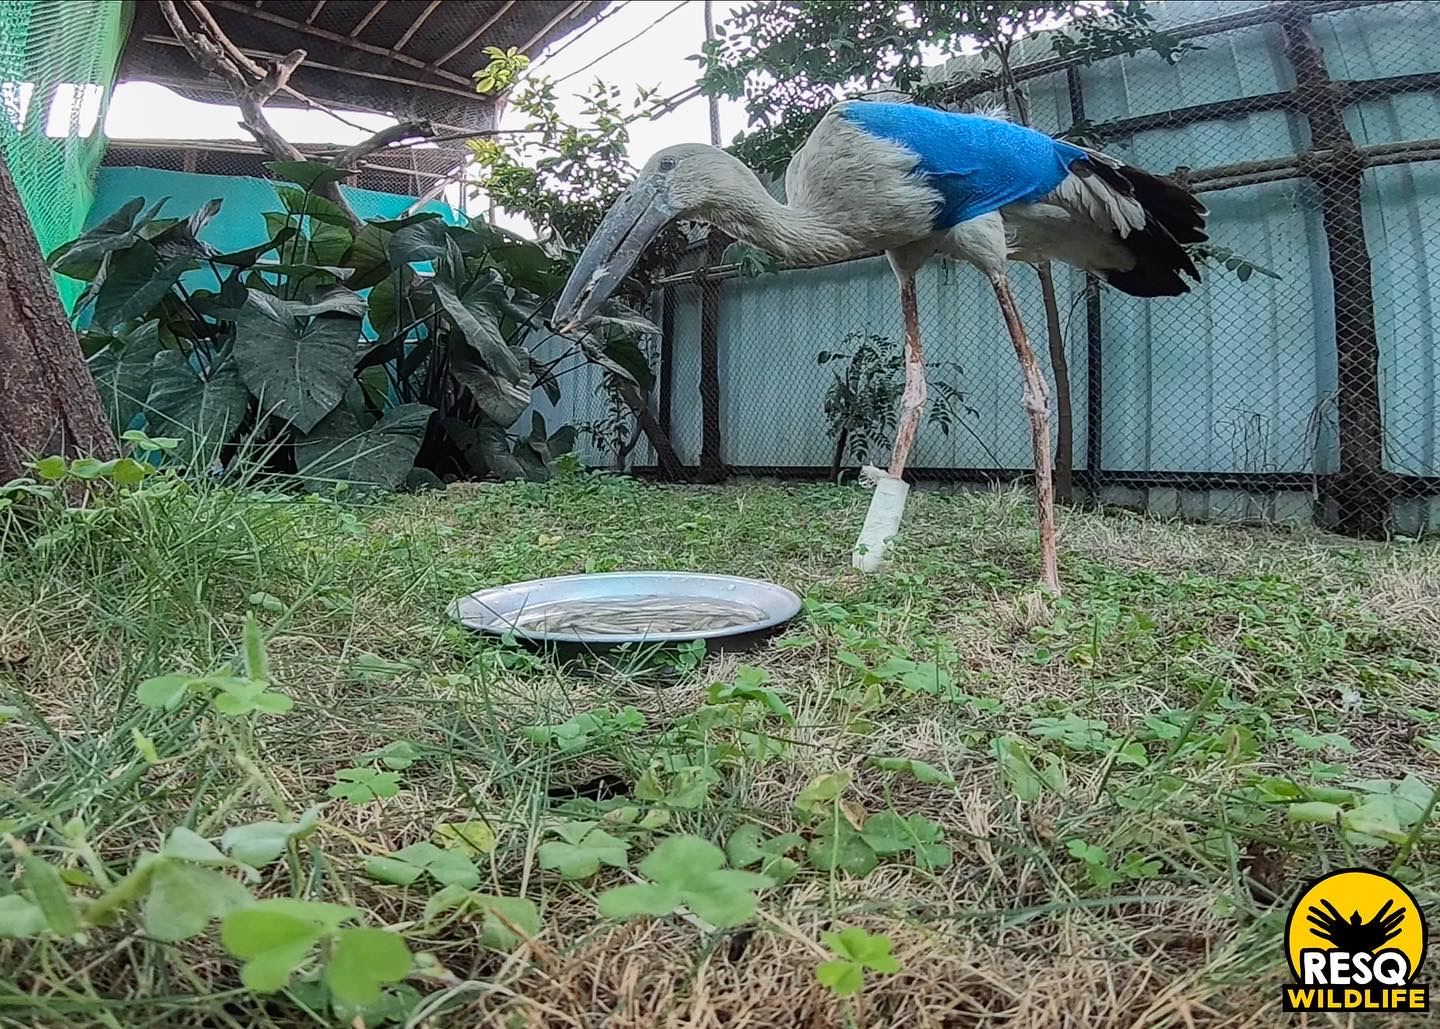 An Openbill Stork with a fractured left wing being rehabilitated at RESQ TTC